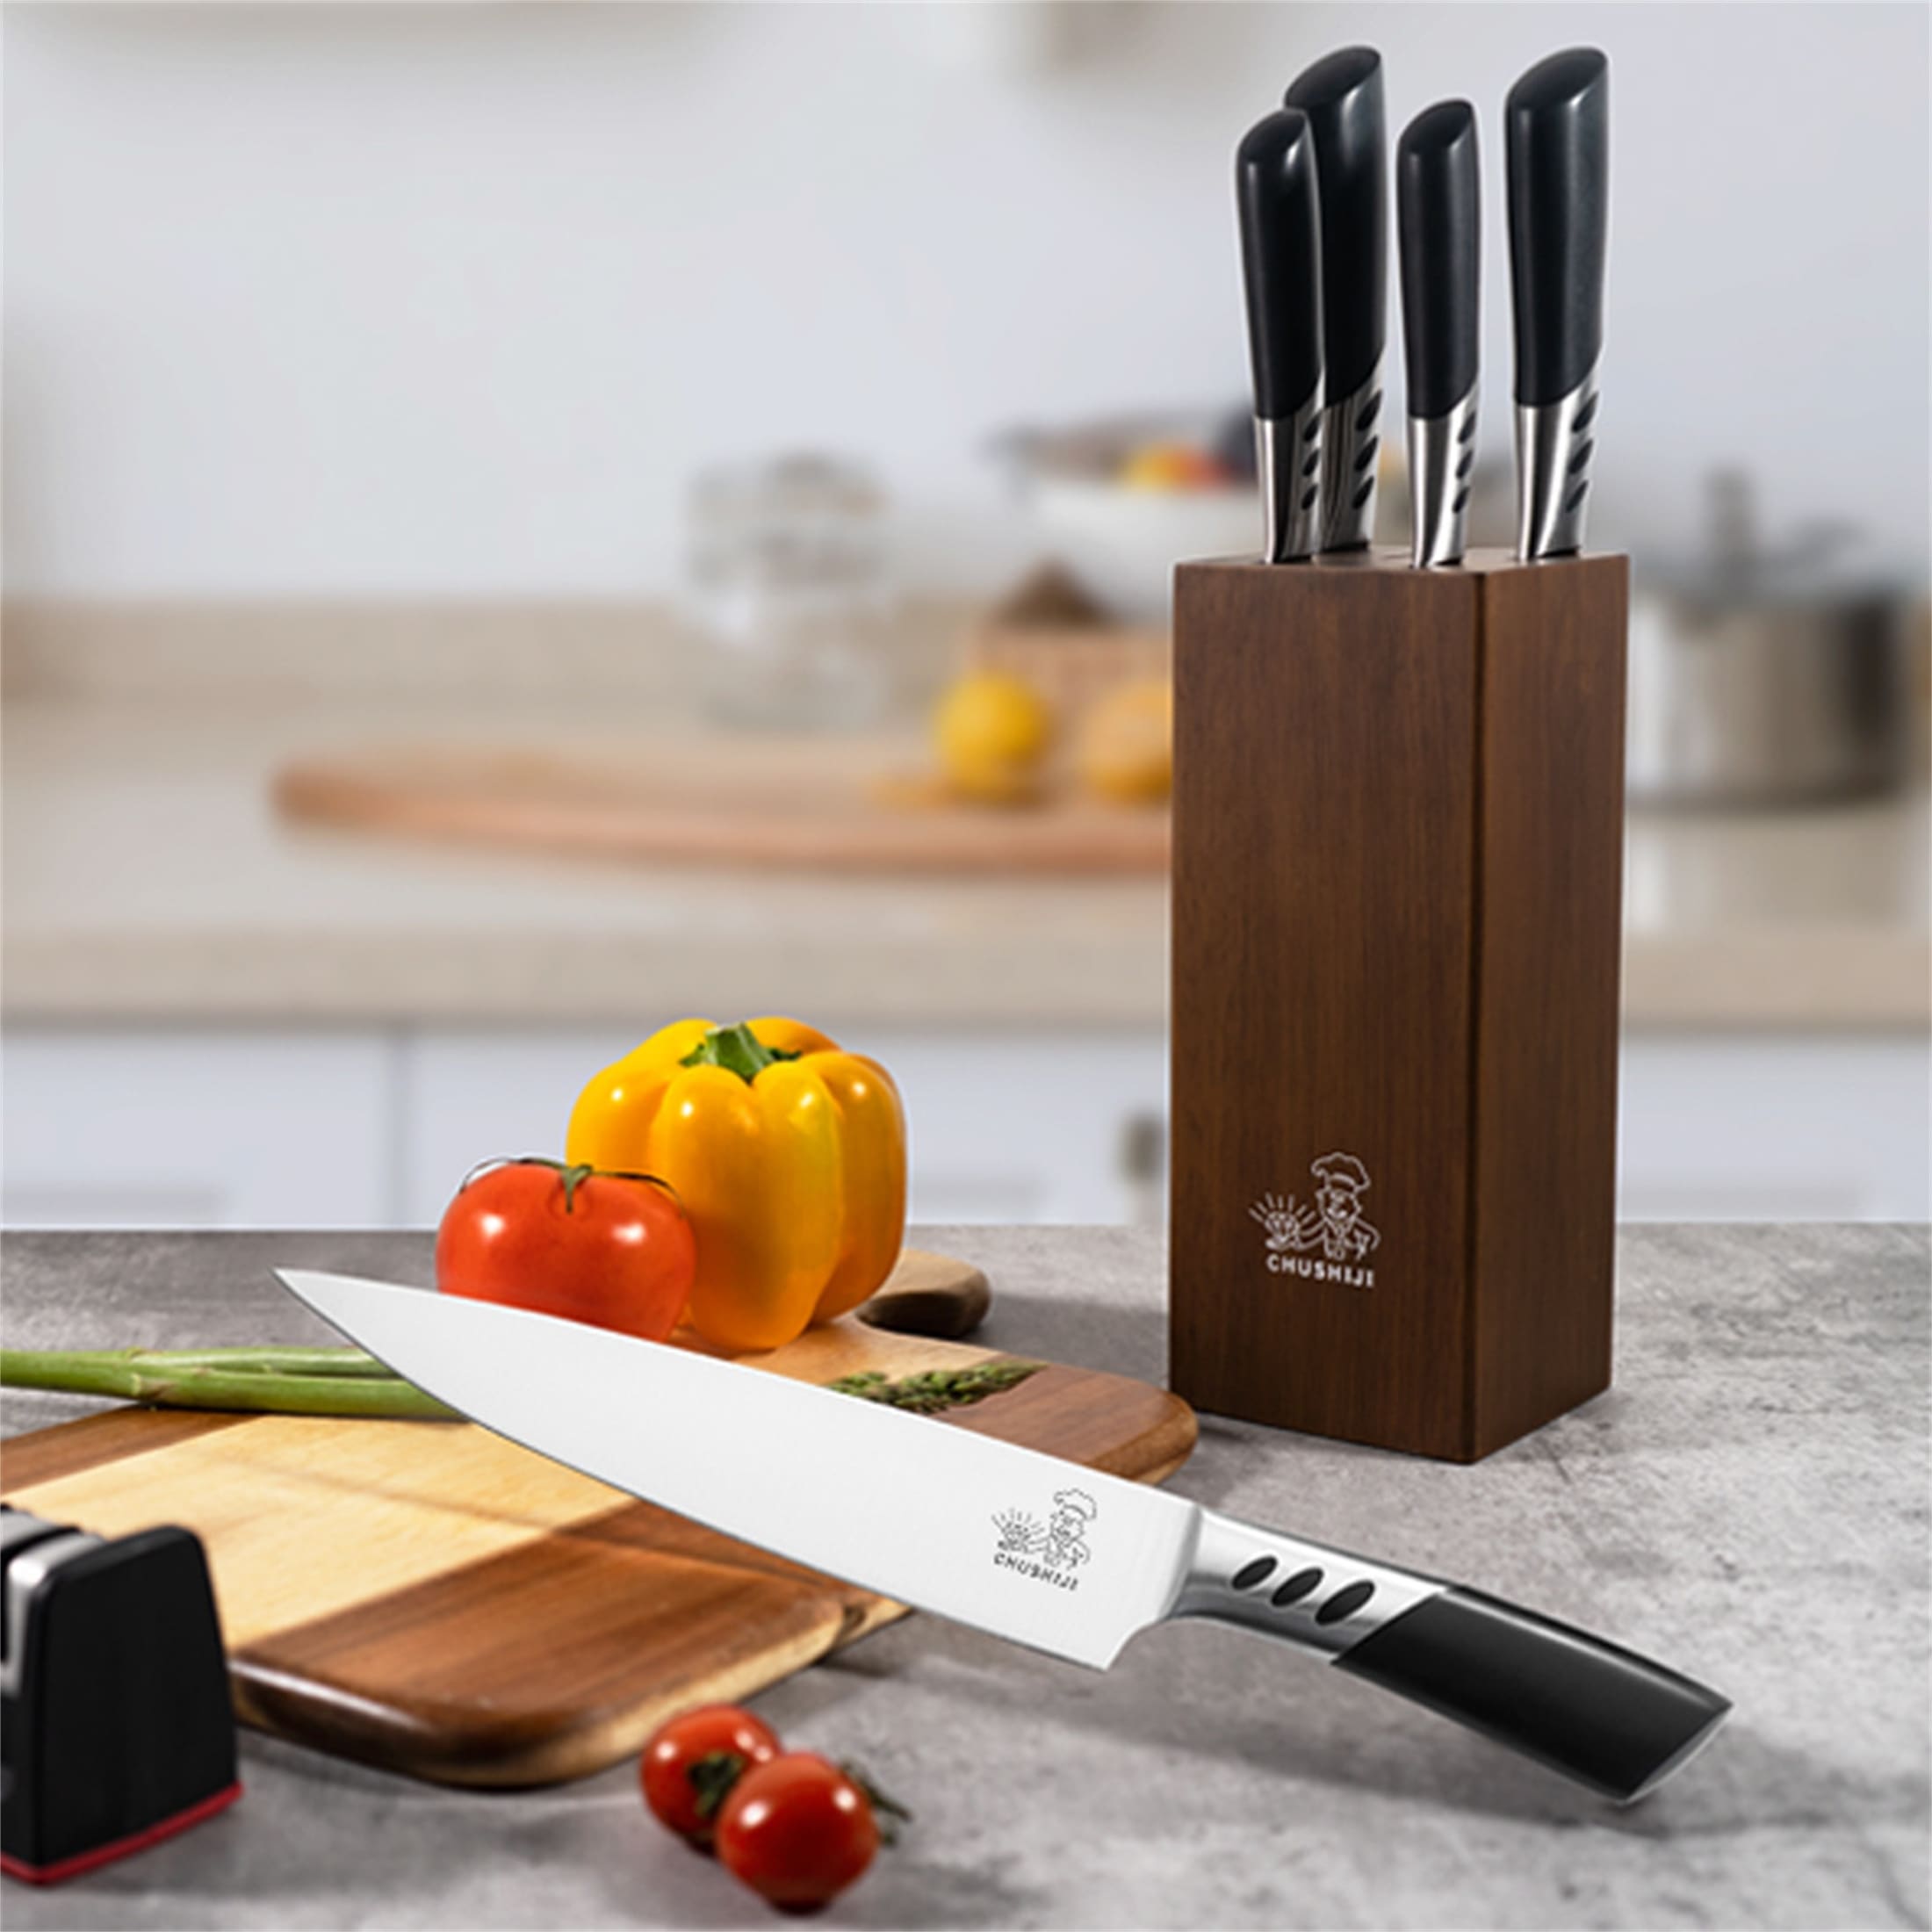 https://ak1.ostkcdn.com/images/products/is/images/direct/607ef11bcd6df26f100fc703f1ccb4cea0dac975/7-Pieces-Knife-Sets-For-Kitchen-With-Block-And-Sharpener.jpg